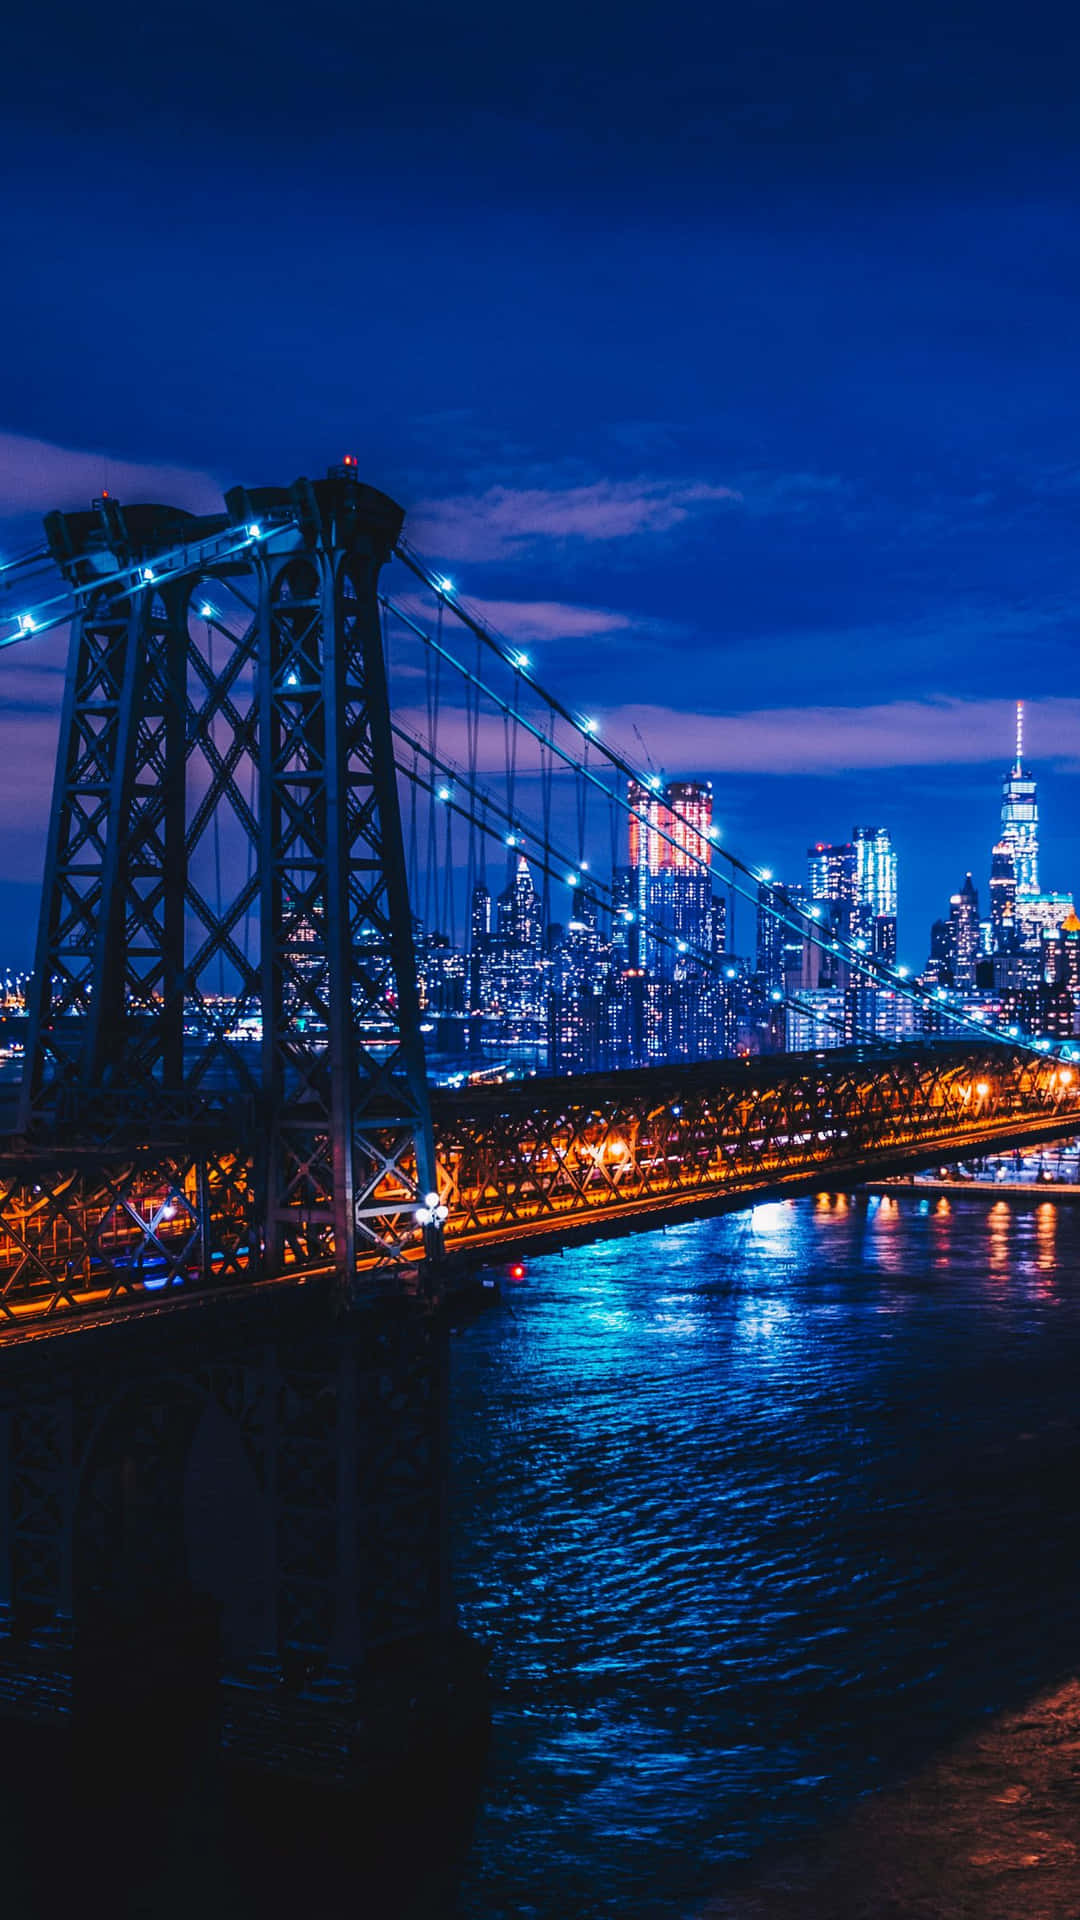 Experience the iconic views of New York City at night Wallpaper